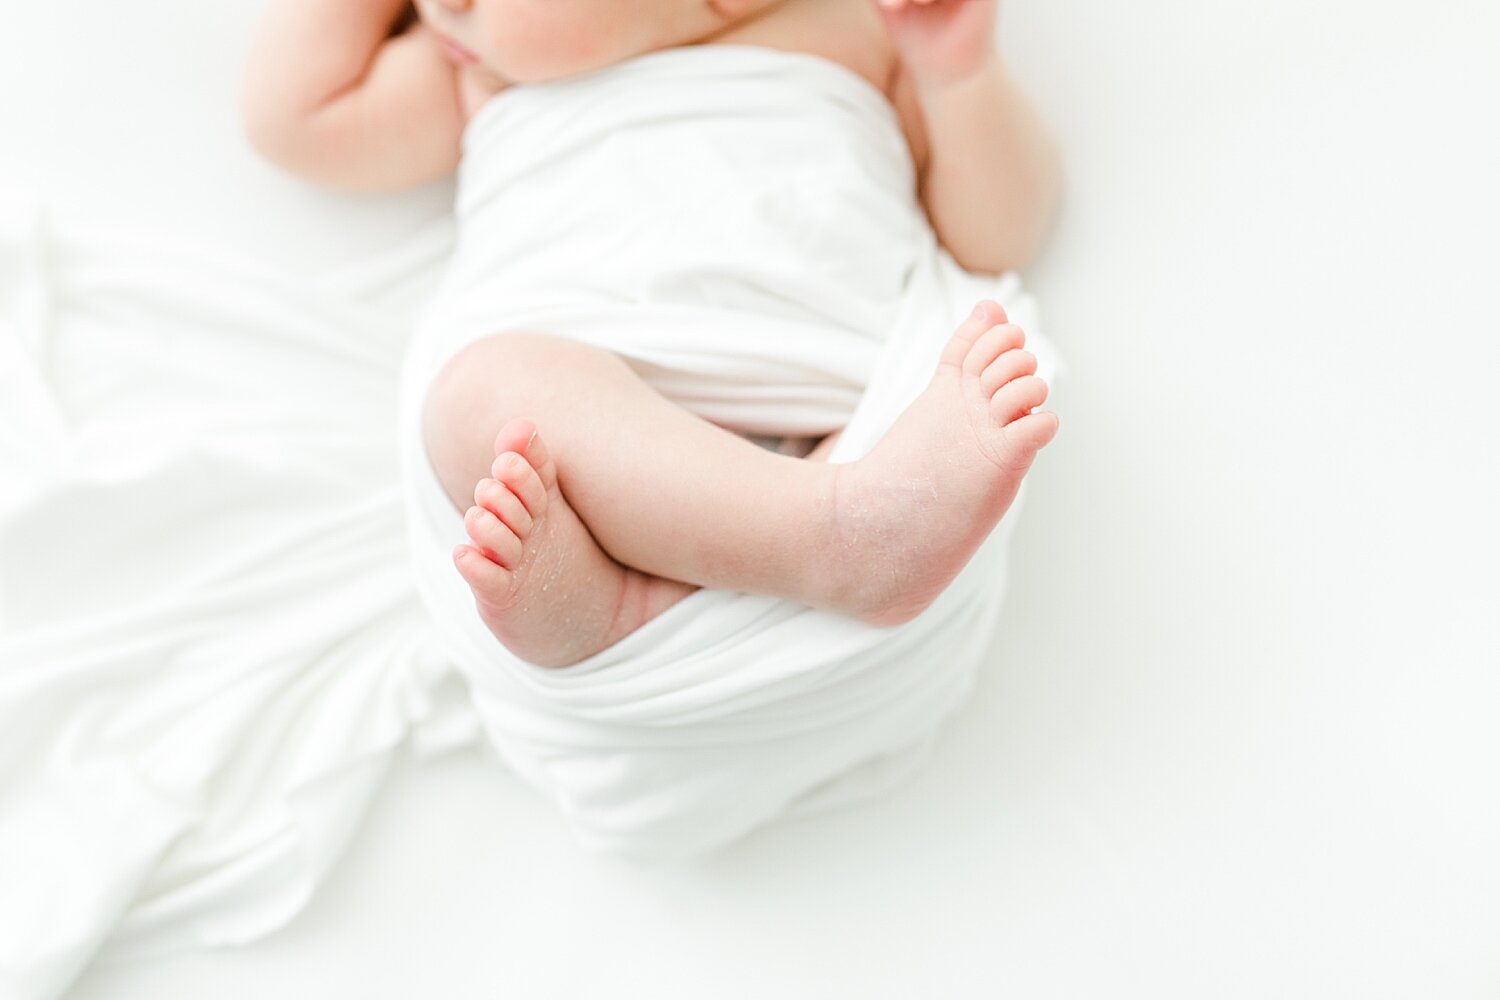 Baby girl swaddled in a white blanket on a white backdrop for newborn session. Photos by Kristin Wood Photography.